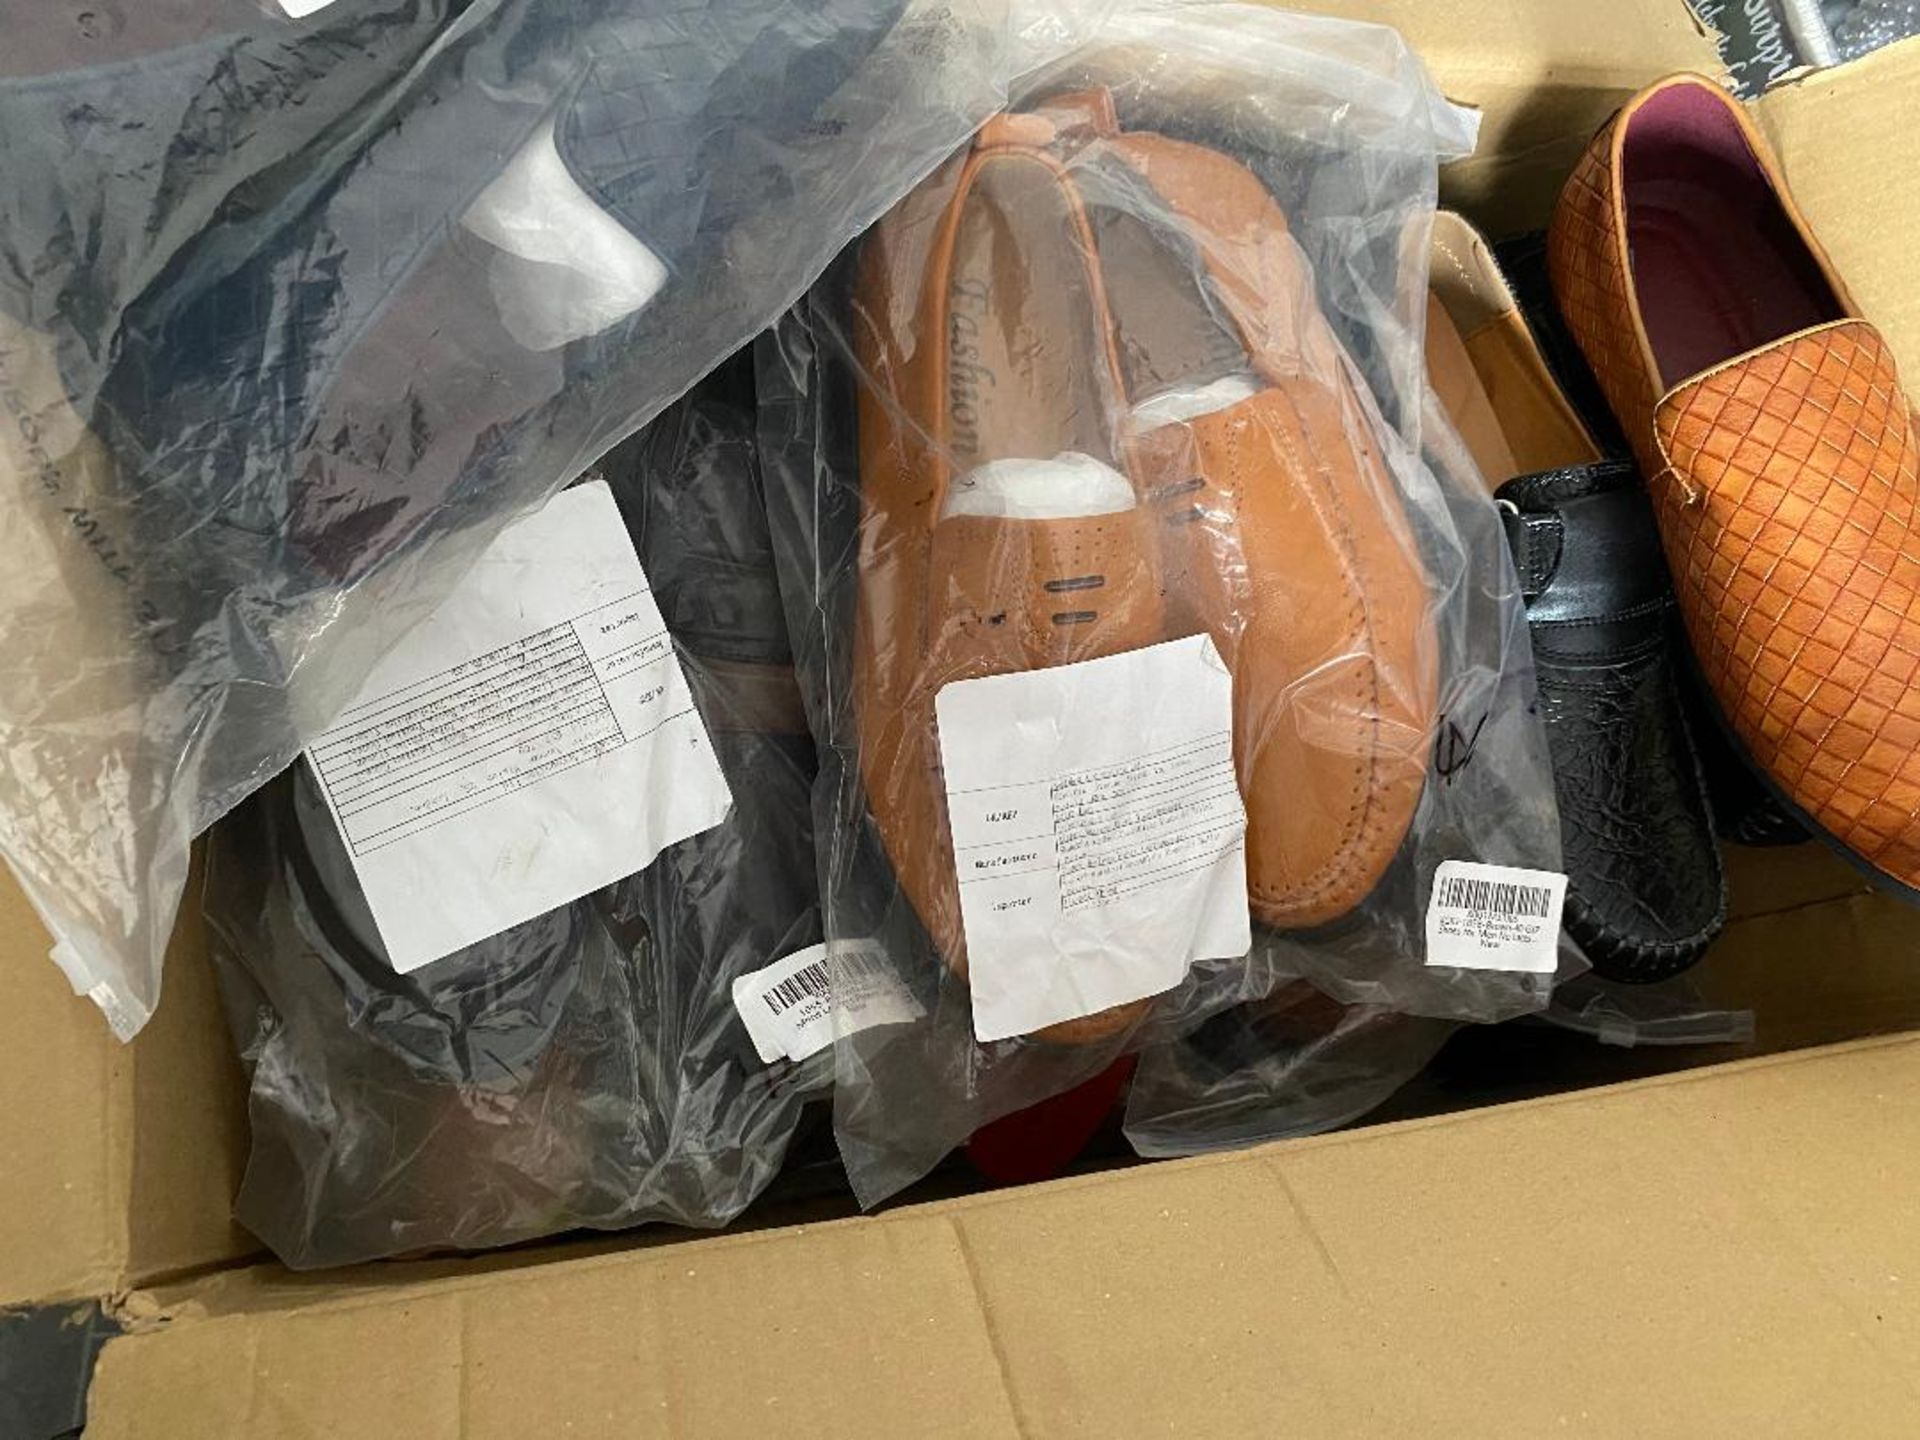 Box of Approx. 13 Pairs of Men's Shoes - Various Colours - Various Styles & Sizes